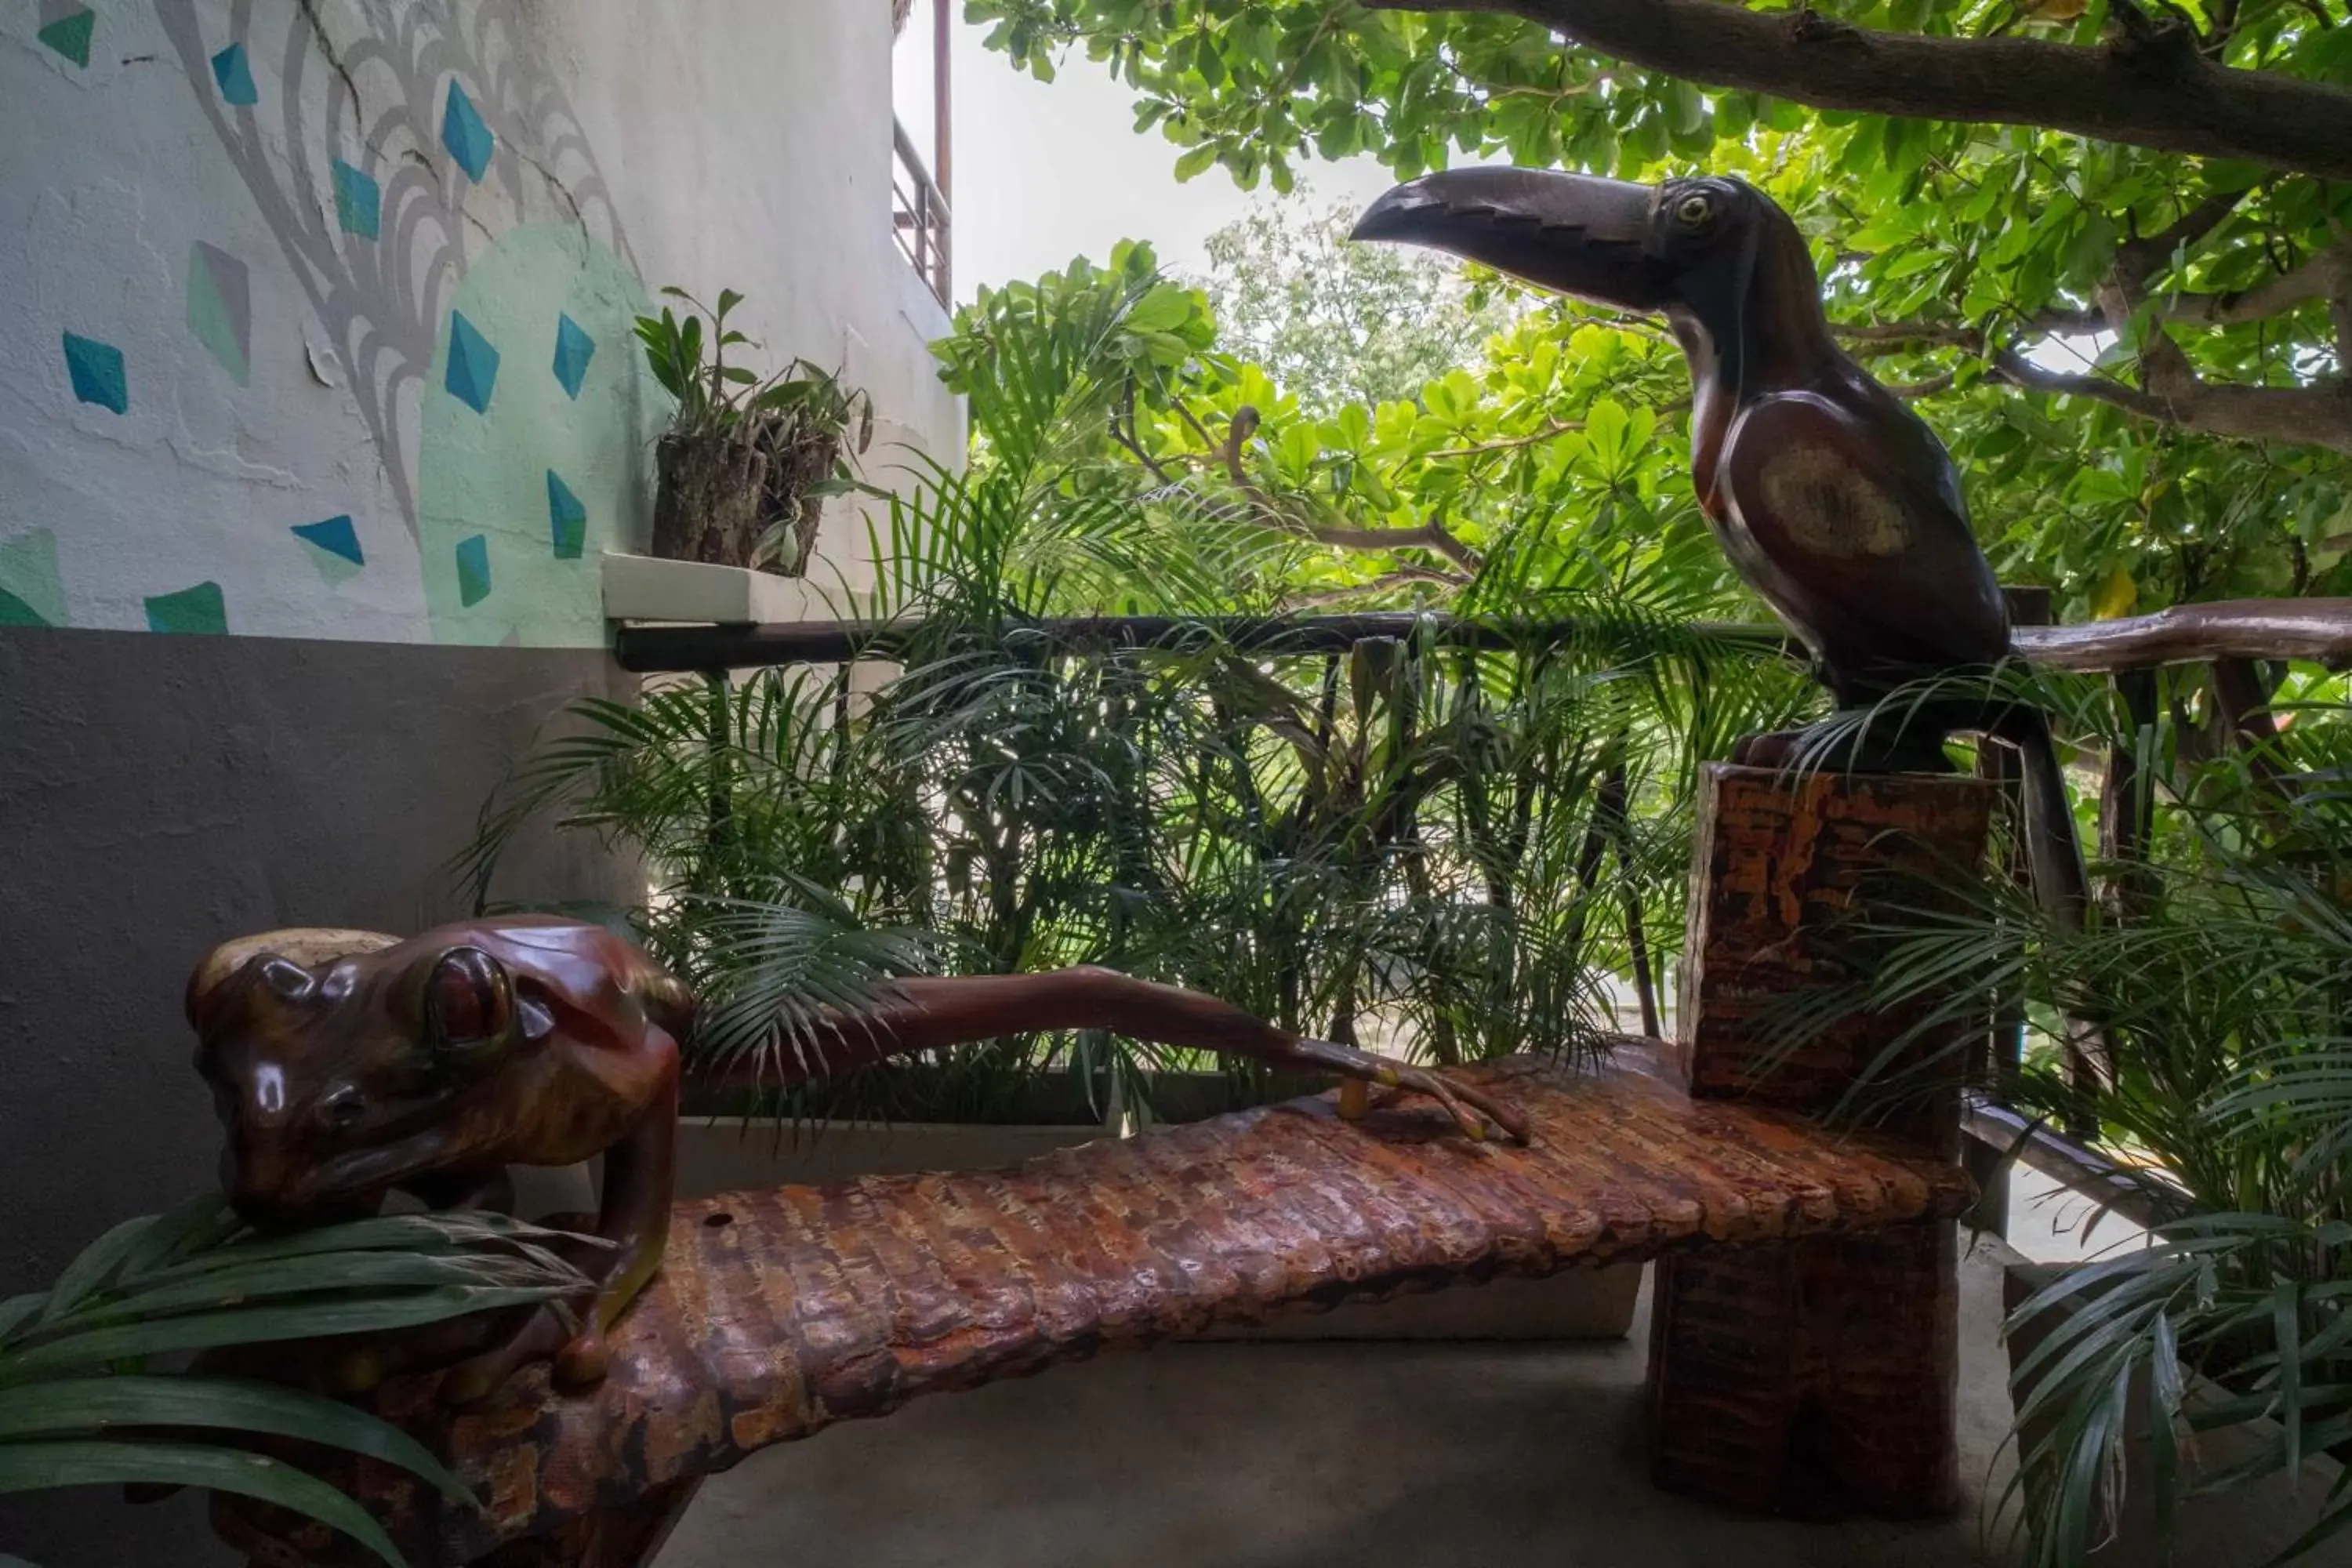 Property building, Other Animals in La Palmita Budget Boutique Hotel